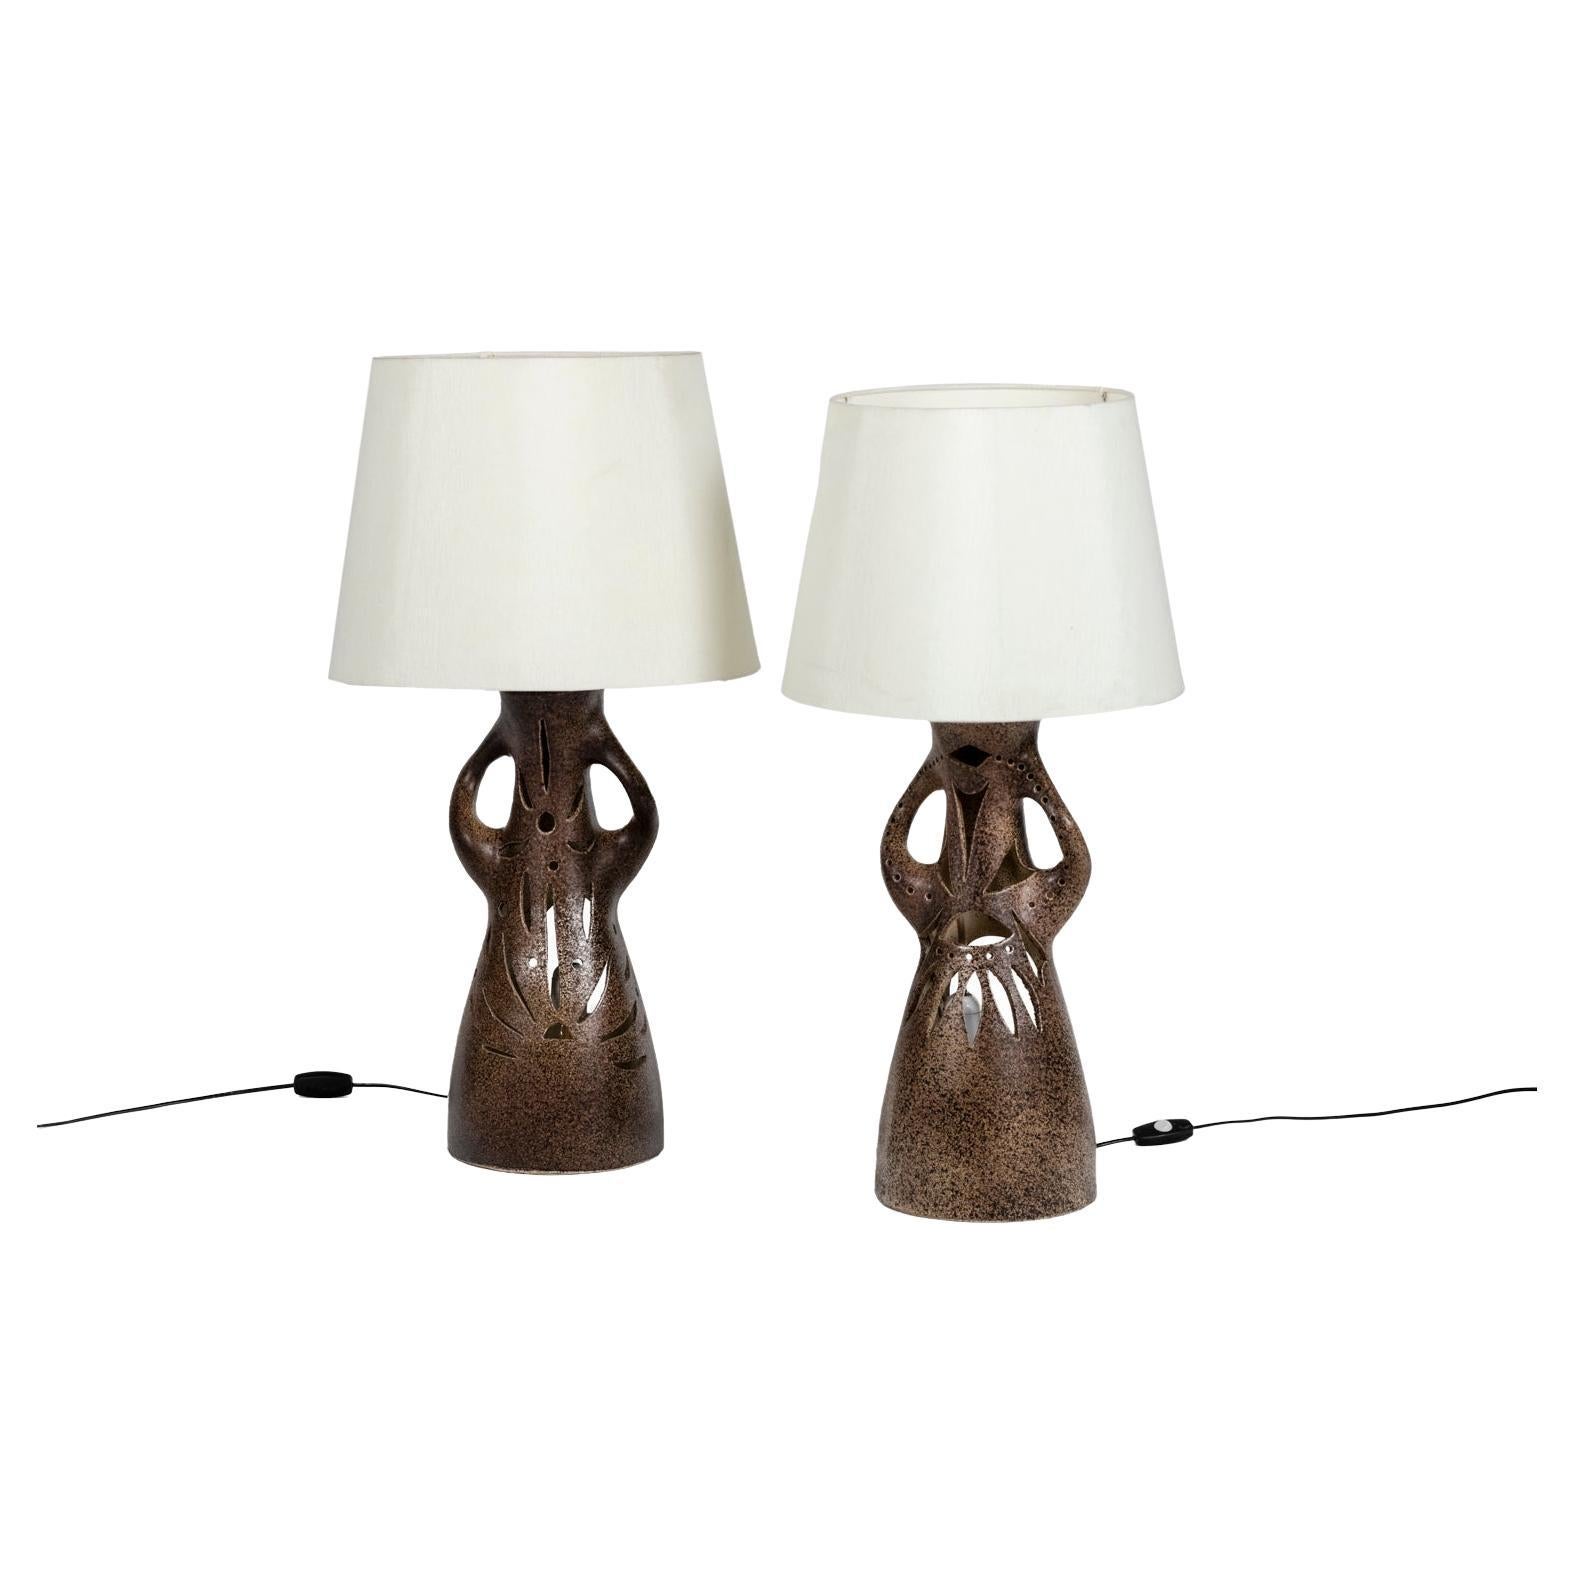 Bastian Le Pemp, Pair of Lamps in Terracotta, 1970s For Sale